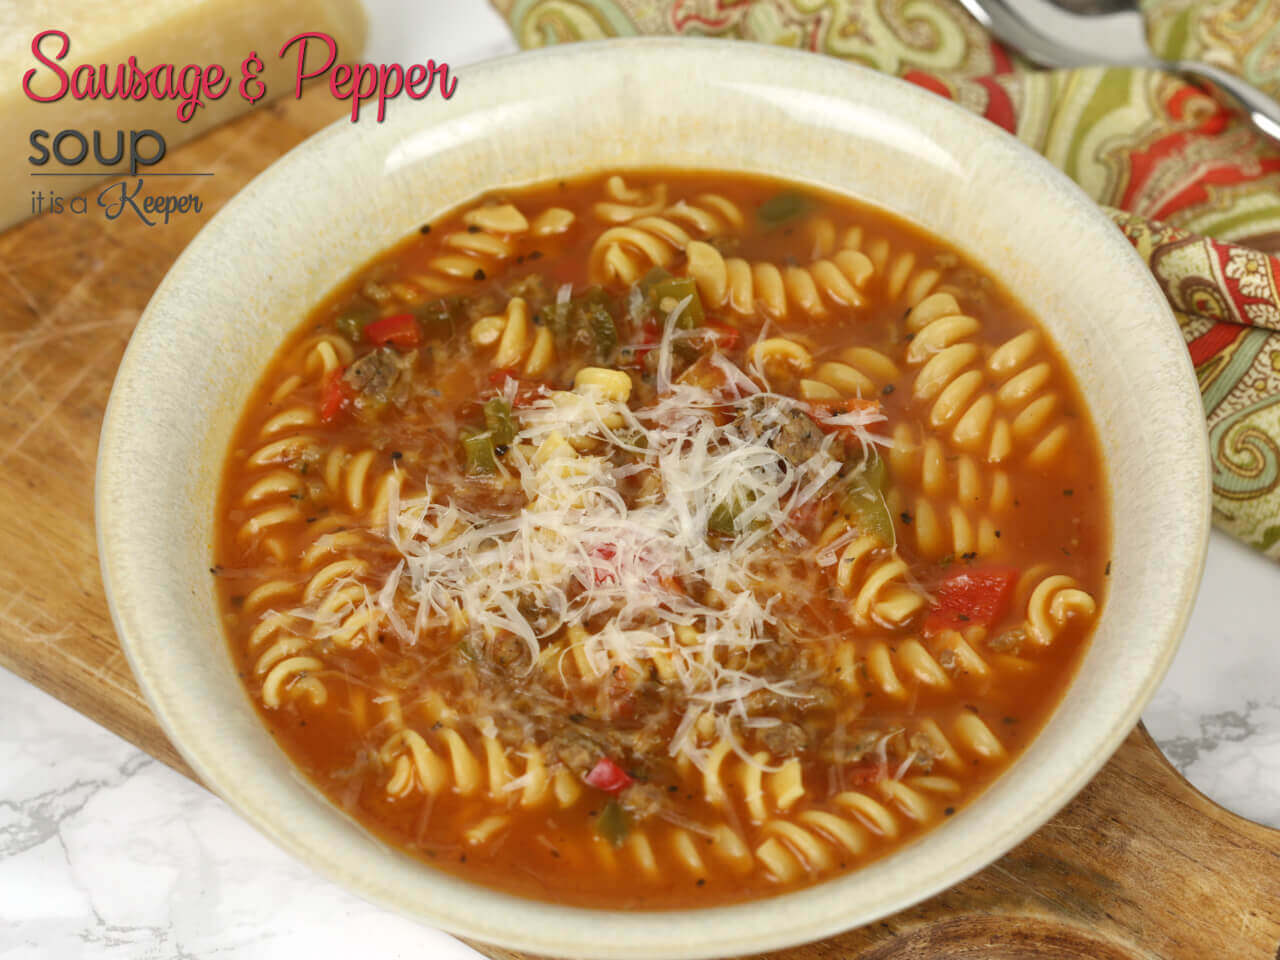 Sausage and Pepper Soup - the easy soup recipe is ready in under 30 minutes